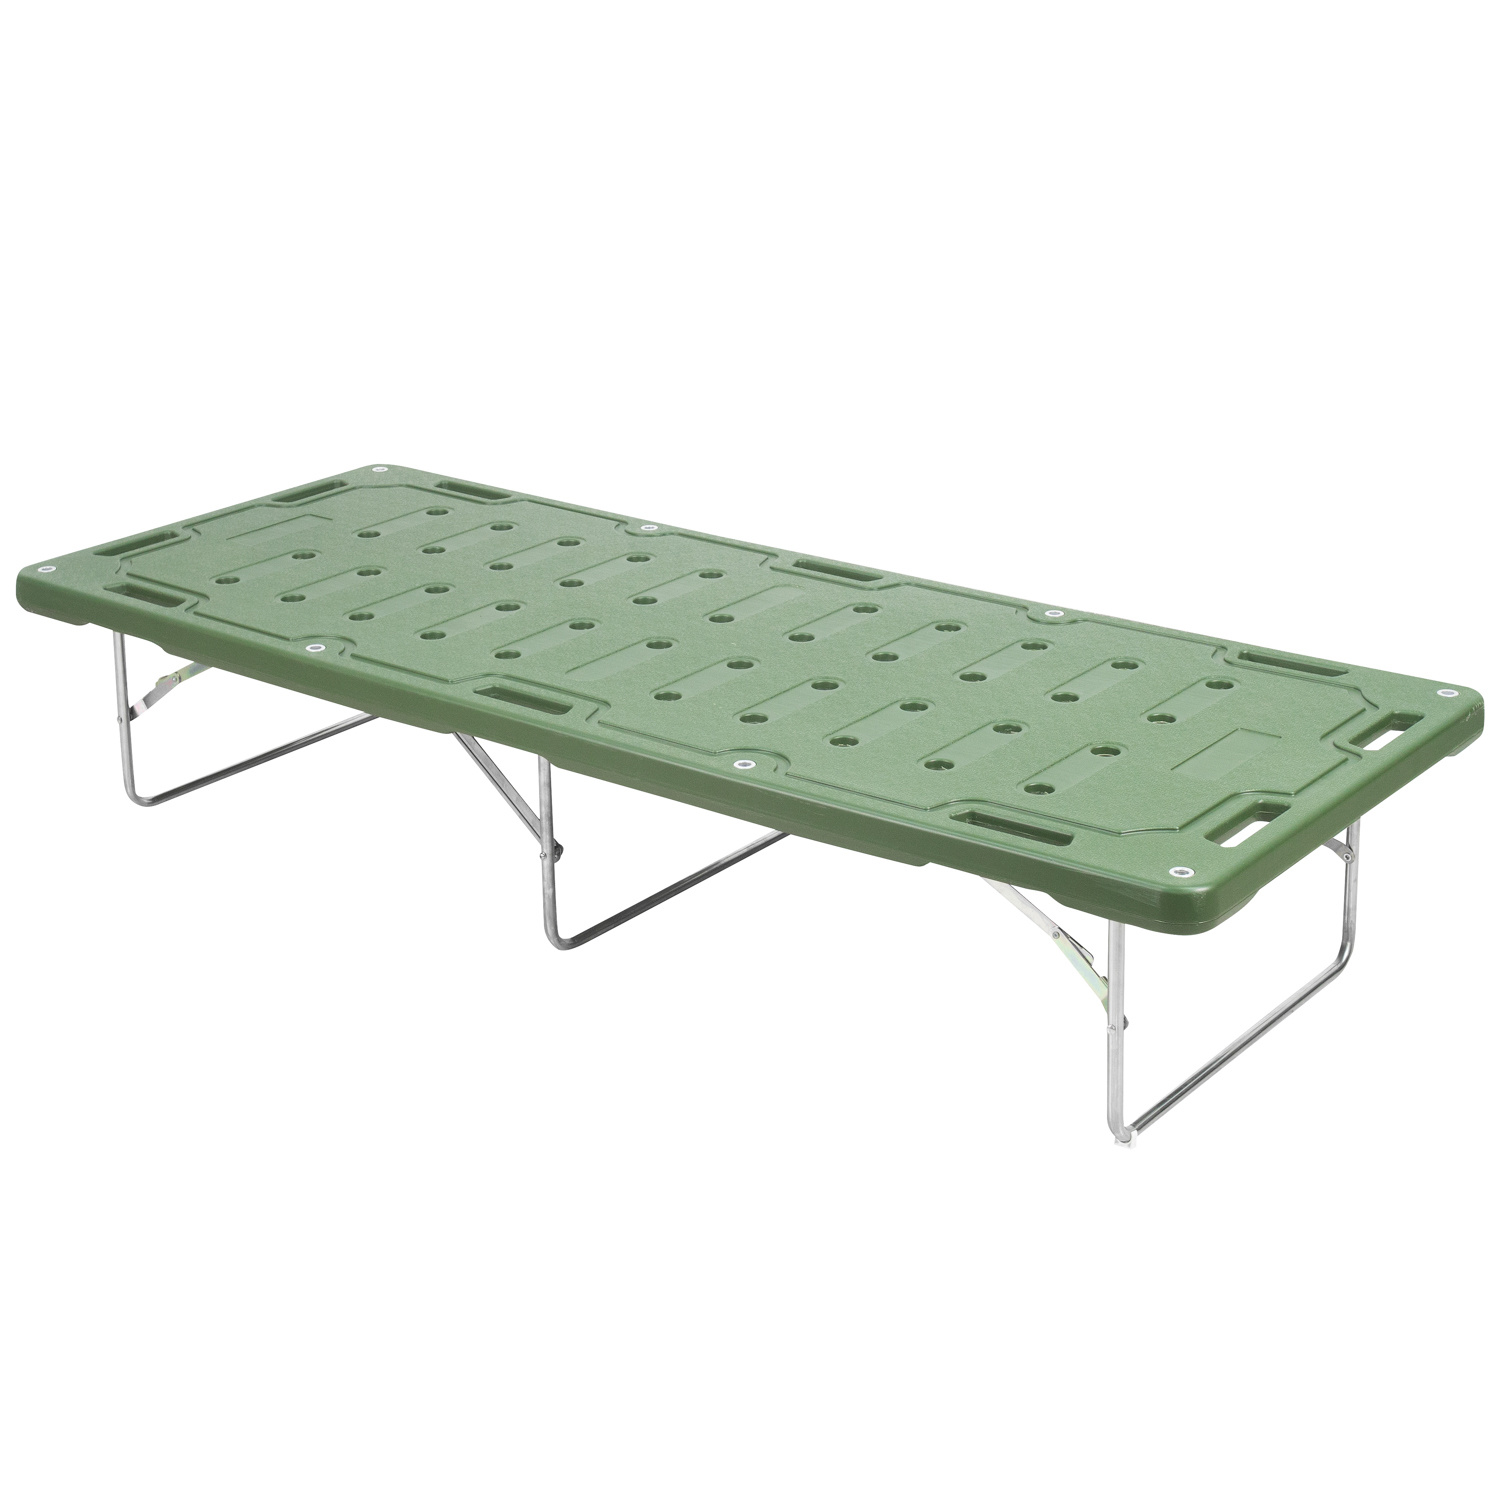 Hot New Products Diagnosis Module - PX2021-P800 Portable Travel Camp Cots with Pad –